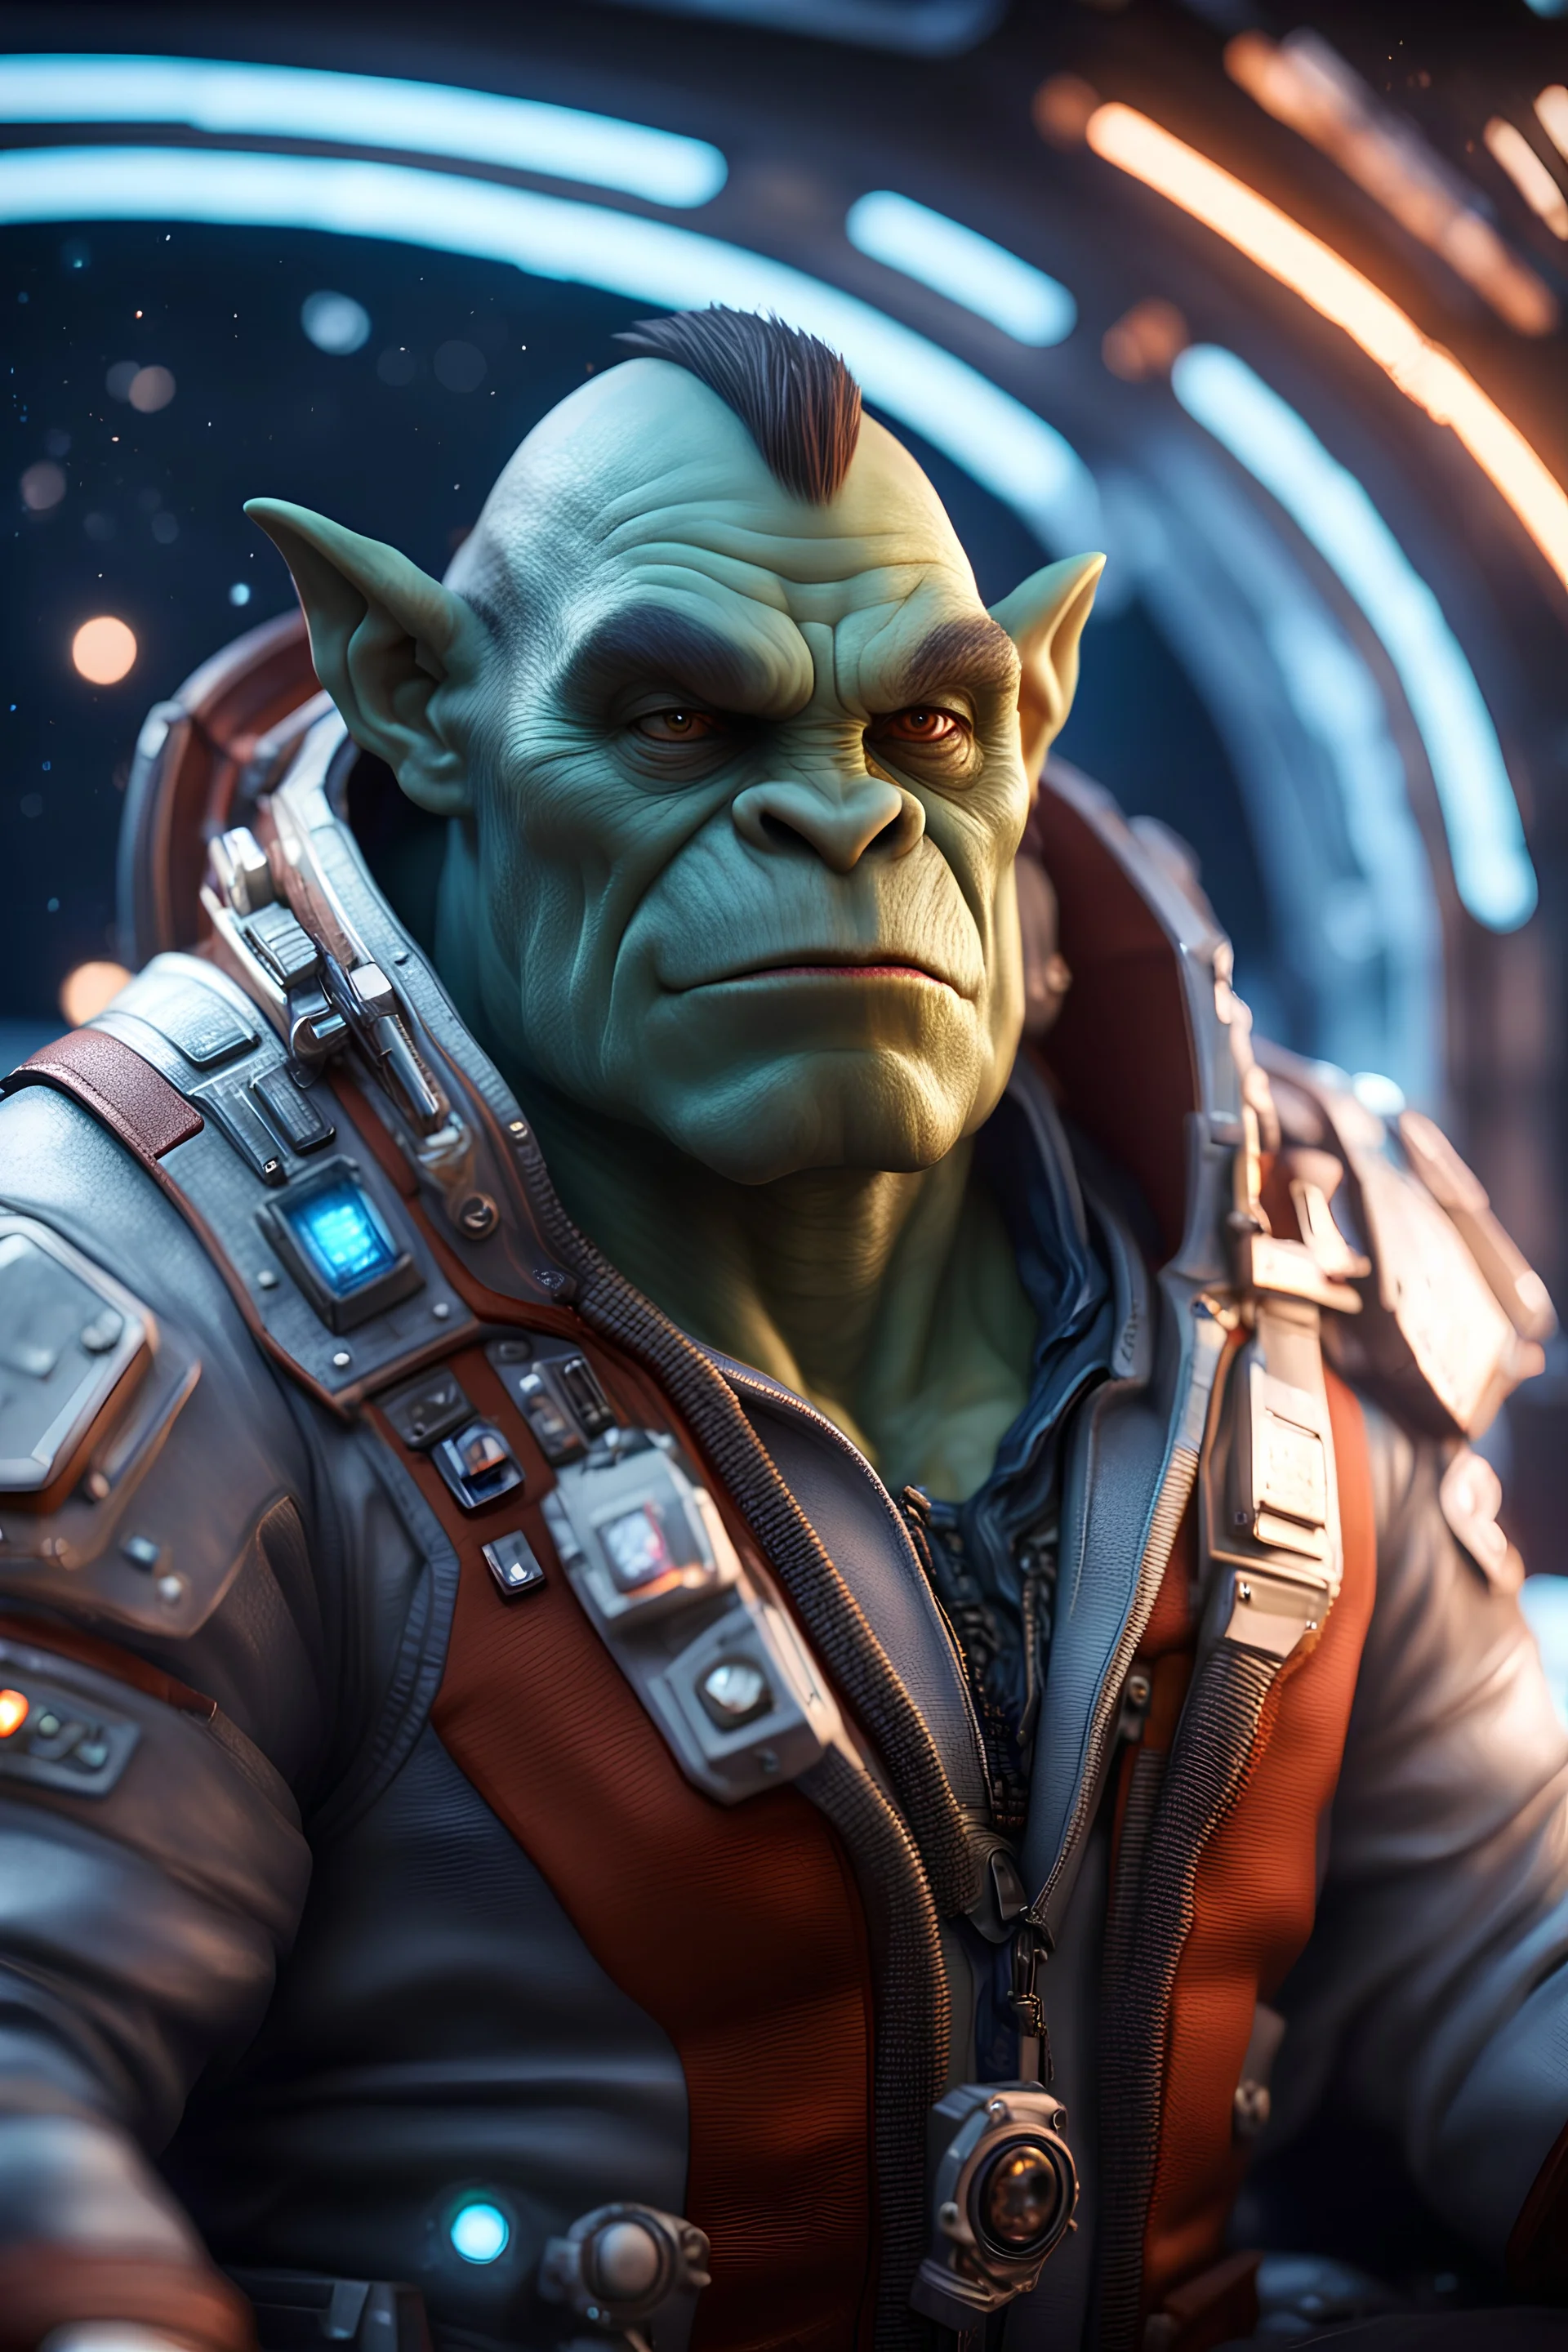 pen outline, really macho pimp orc seal captain that go hard sitting in space station cockpit , in front of space portal dimensional glittering device, bokeh like f/0.8, tilt-shift lens 8k, high detail, smooth render, down-light, unreal engine, prize winning